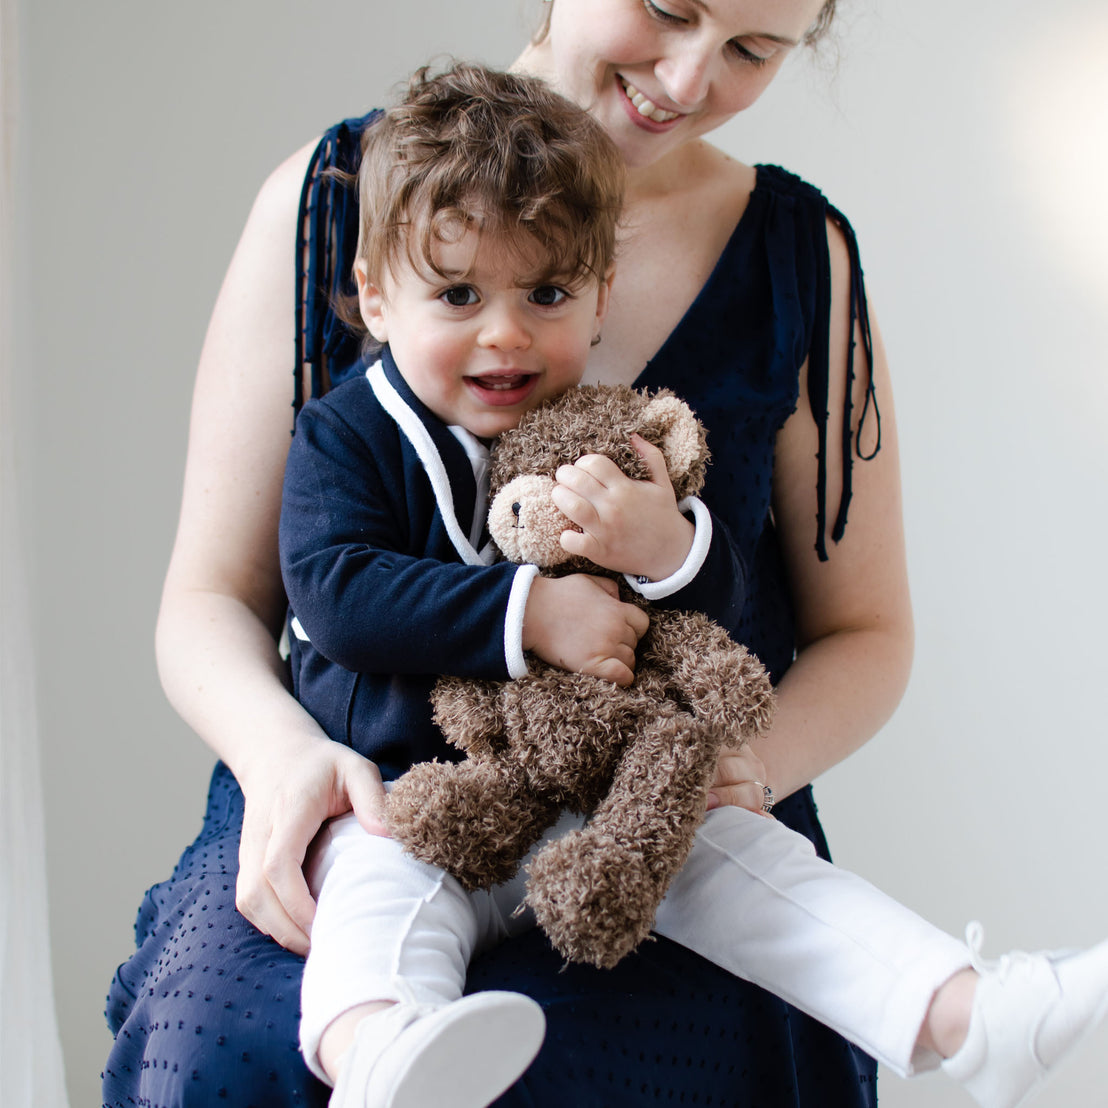 Smiling baby boy sitting on his mother's lap. He is wearing the Elliott 3-Piece Suit, including the jacket, pants, and onesie. He is also holding the Cubby Bear.